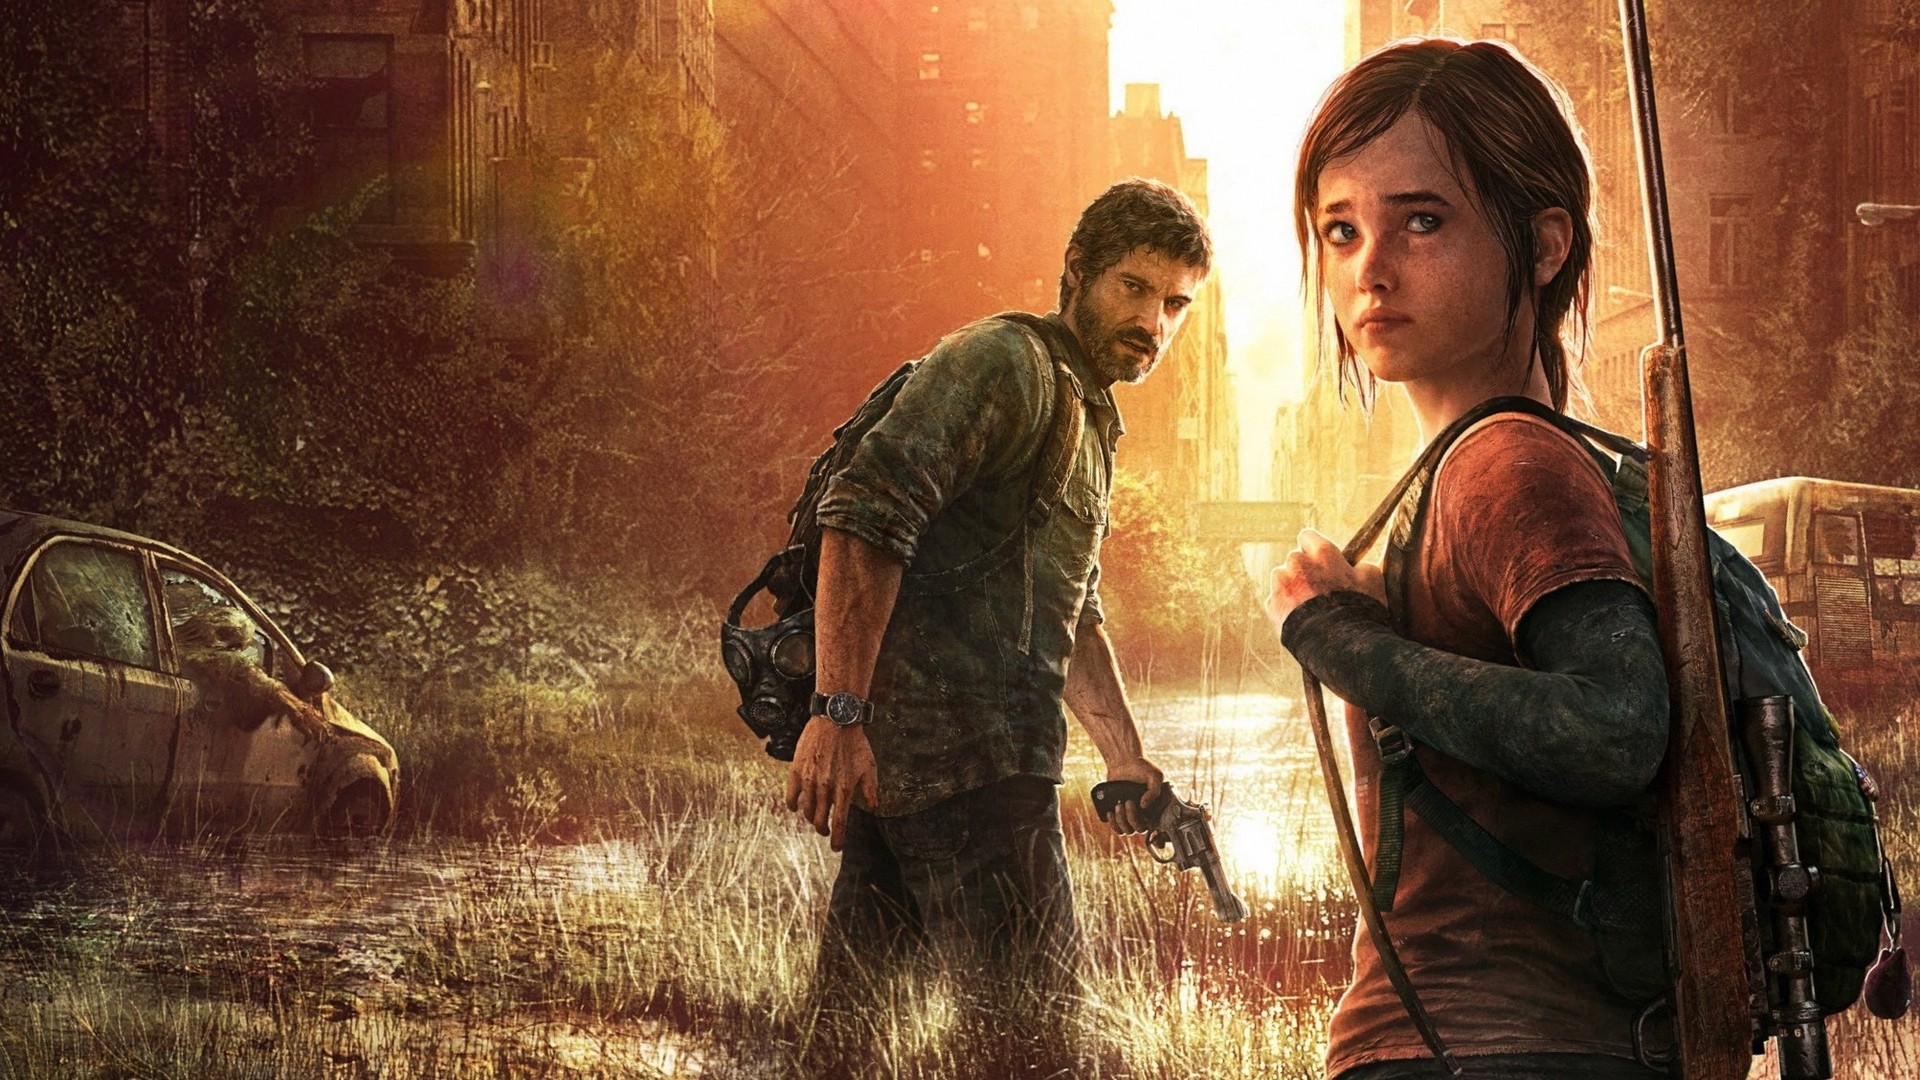 General 1920x1080 The Last of Us video games video game art video game girls video game men apocalyptic